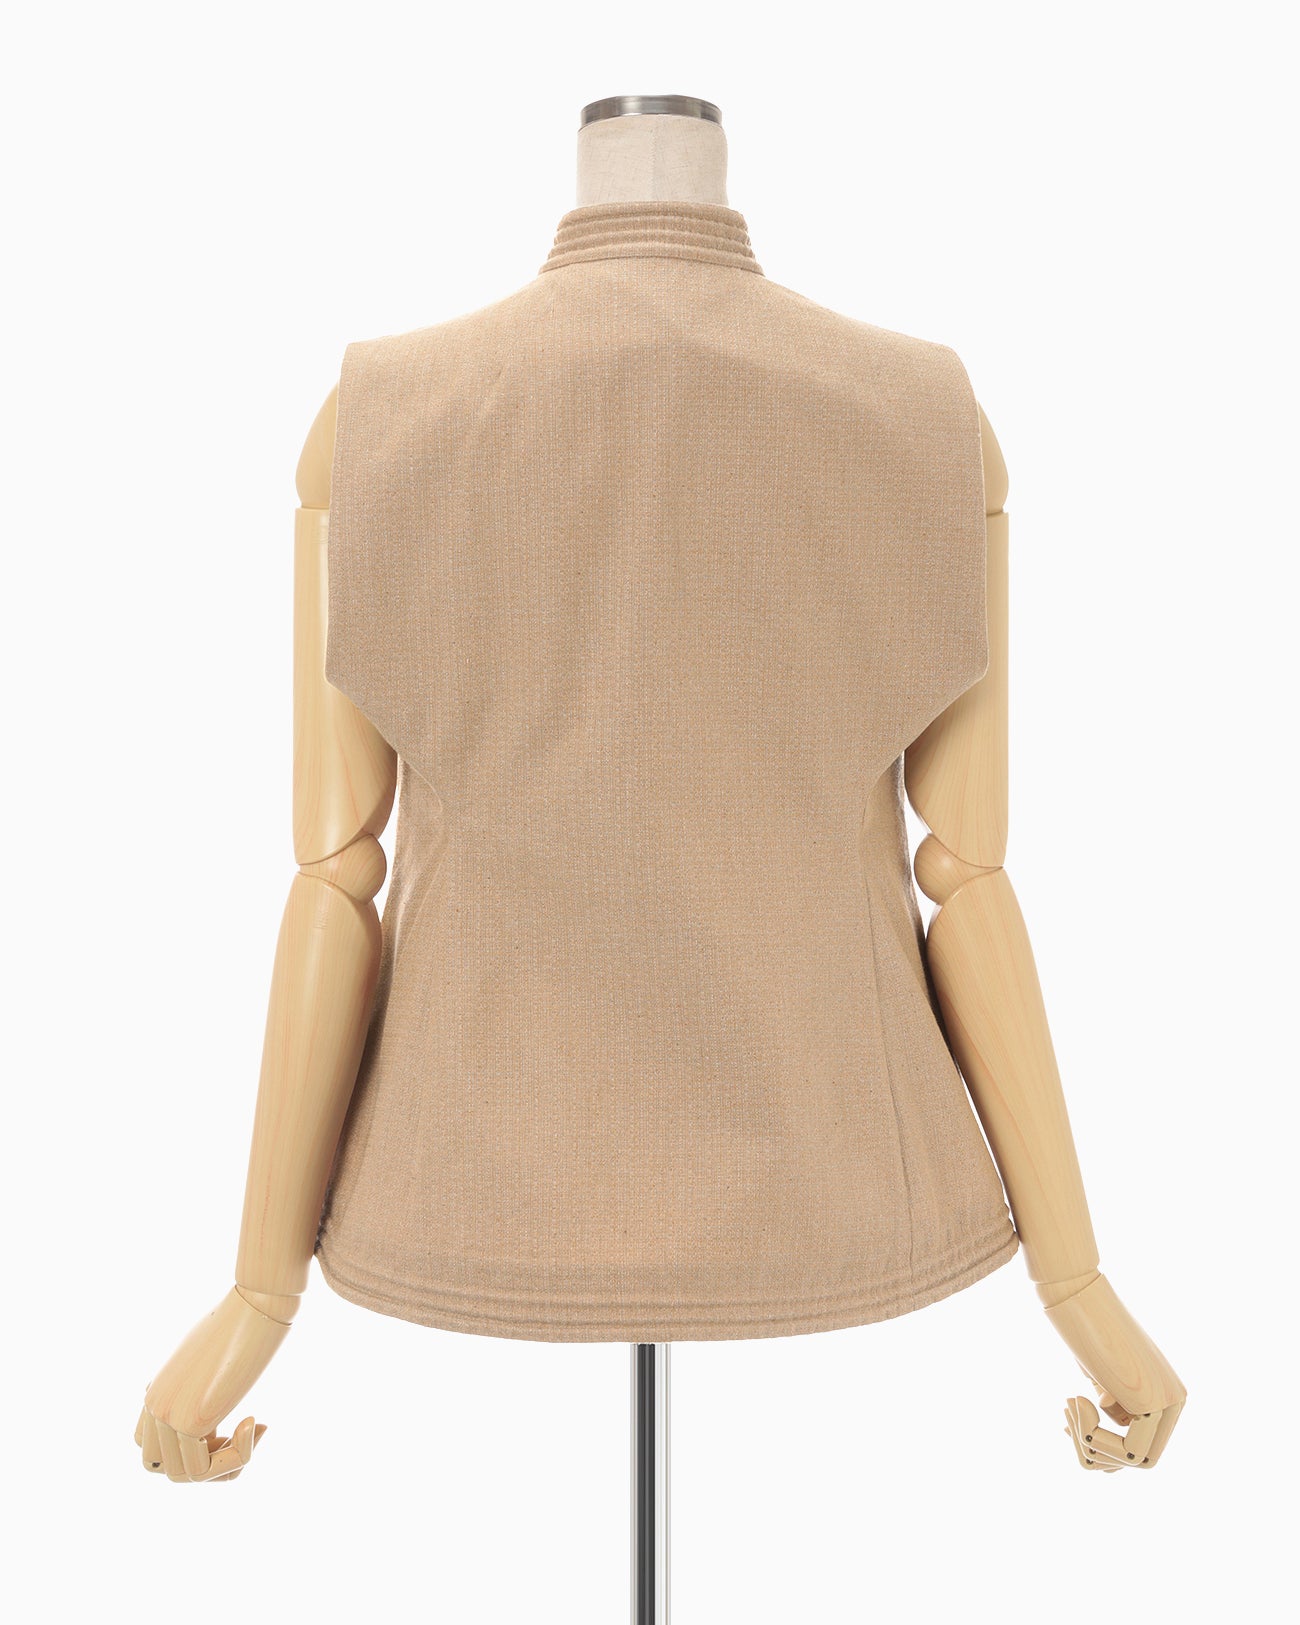 Naturally Coloured Cotton Dobby Vest - beige